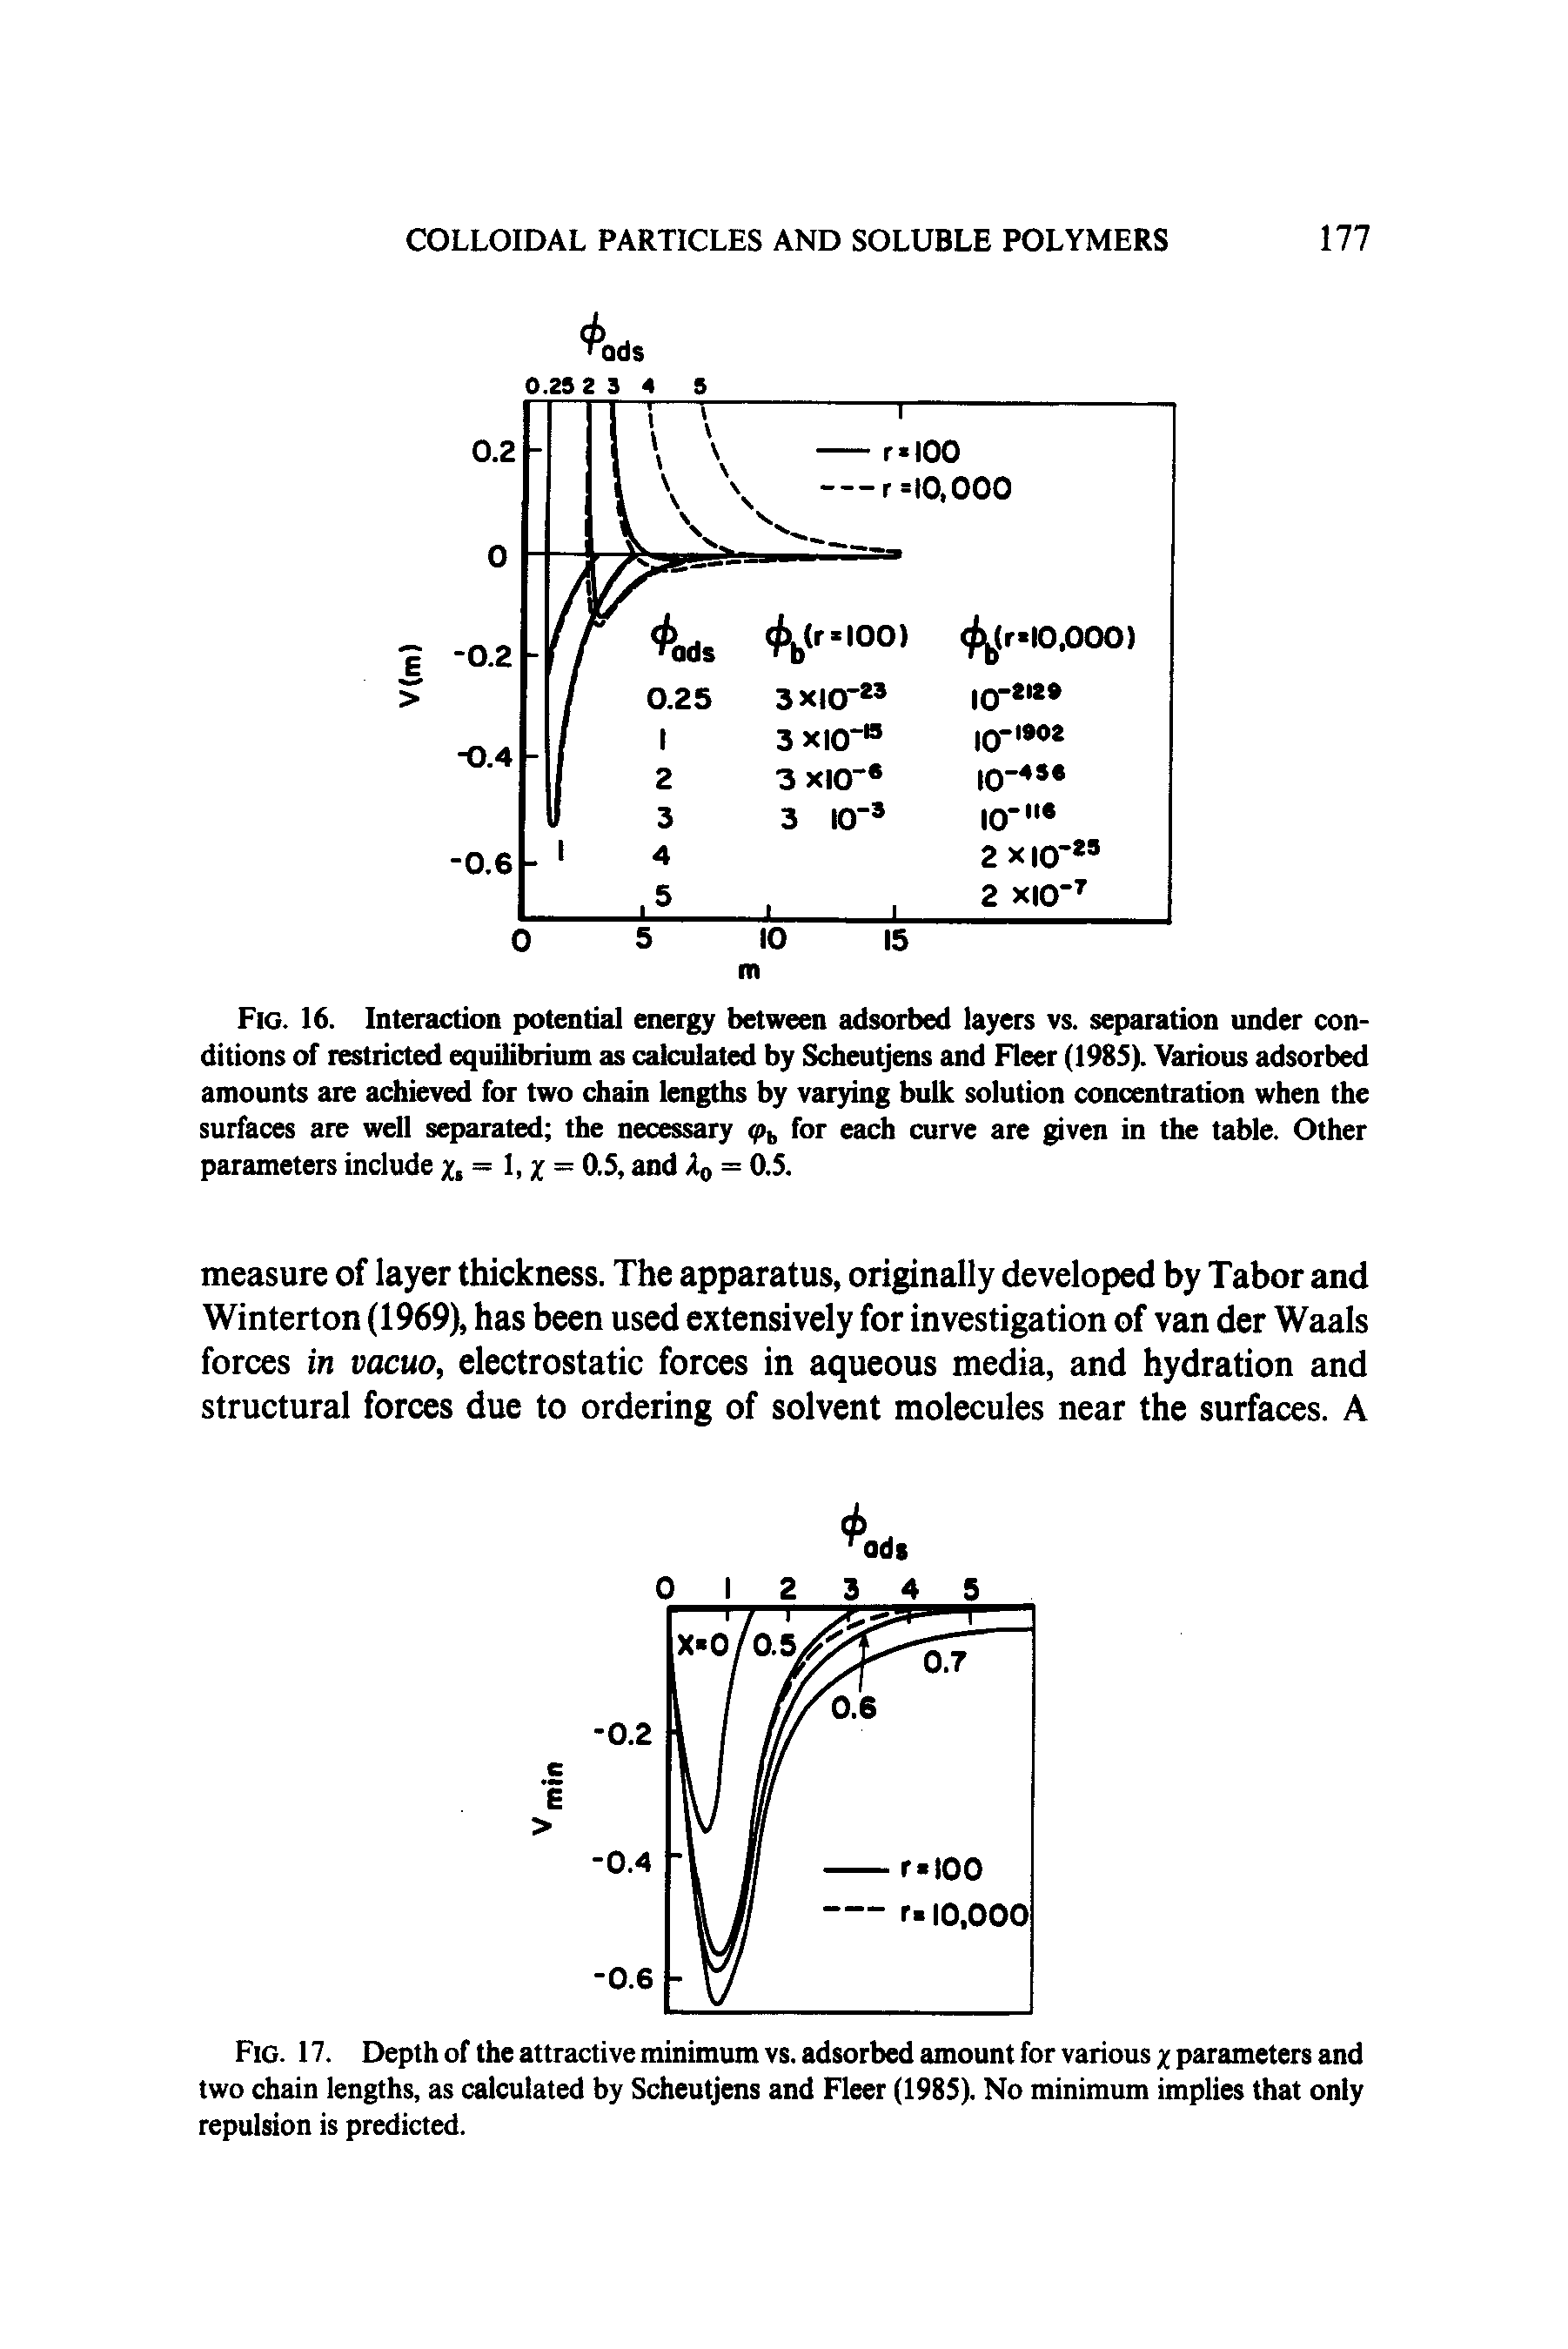 Fig. 16. Interaction potential energy between adsorbed layers vs. separation under conditions of restricted equilibrium as calculated by Scheutjens and Fleer (198S). Various adsorbed amounts are achieved for two chain lengths by varying bulk solution concentration when the surfaces are well separated the necessary q>b for each curve are given in the table. Other parameters include %,= L X = 0.5, and A0 = 0.5.